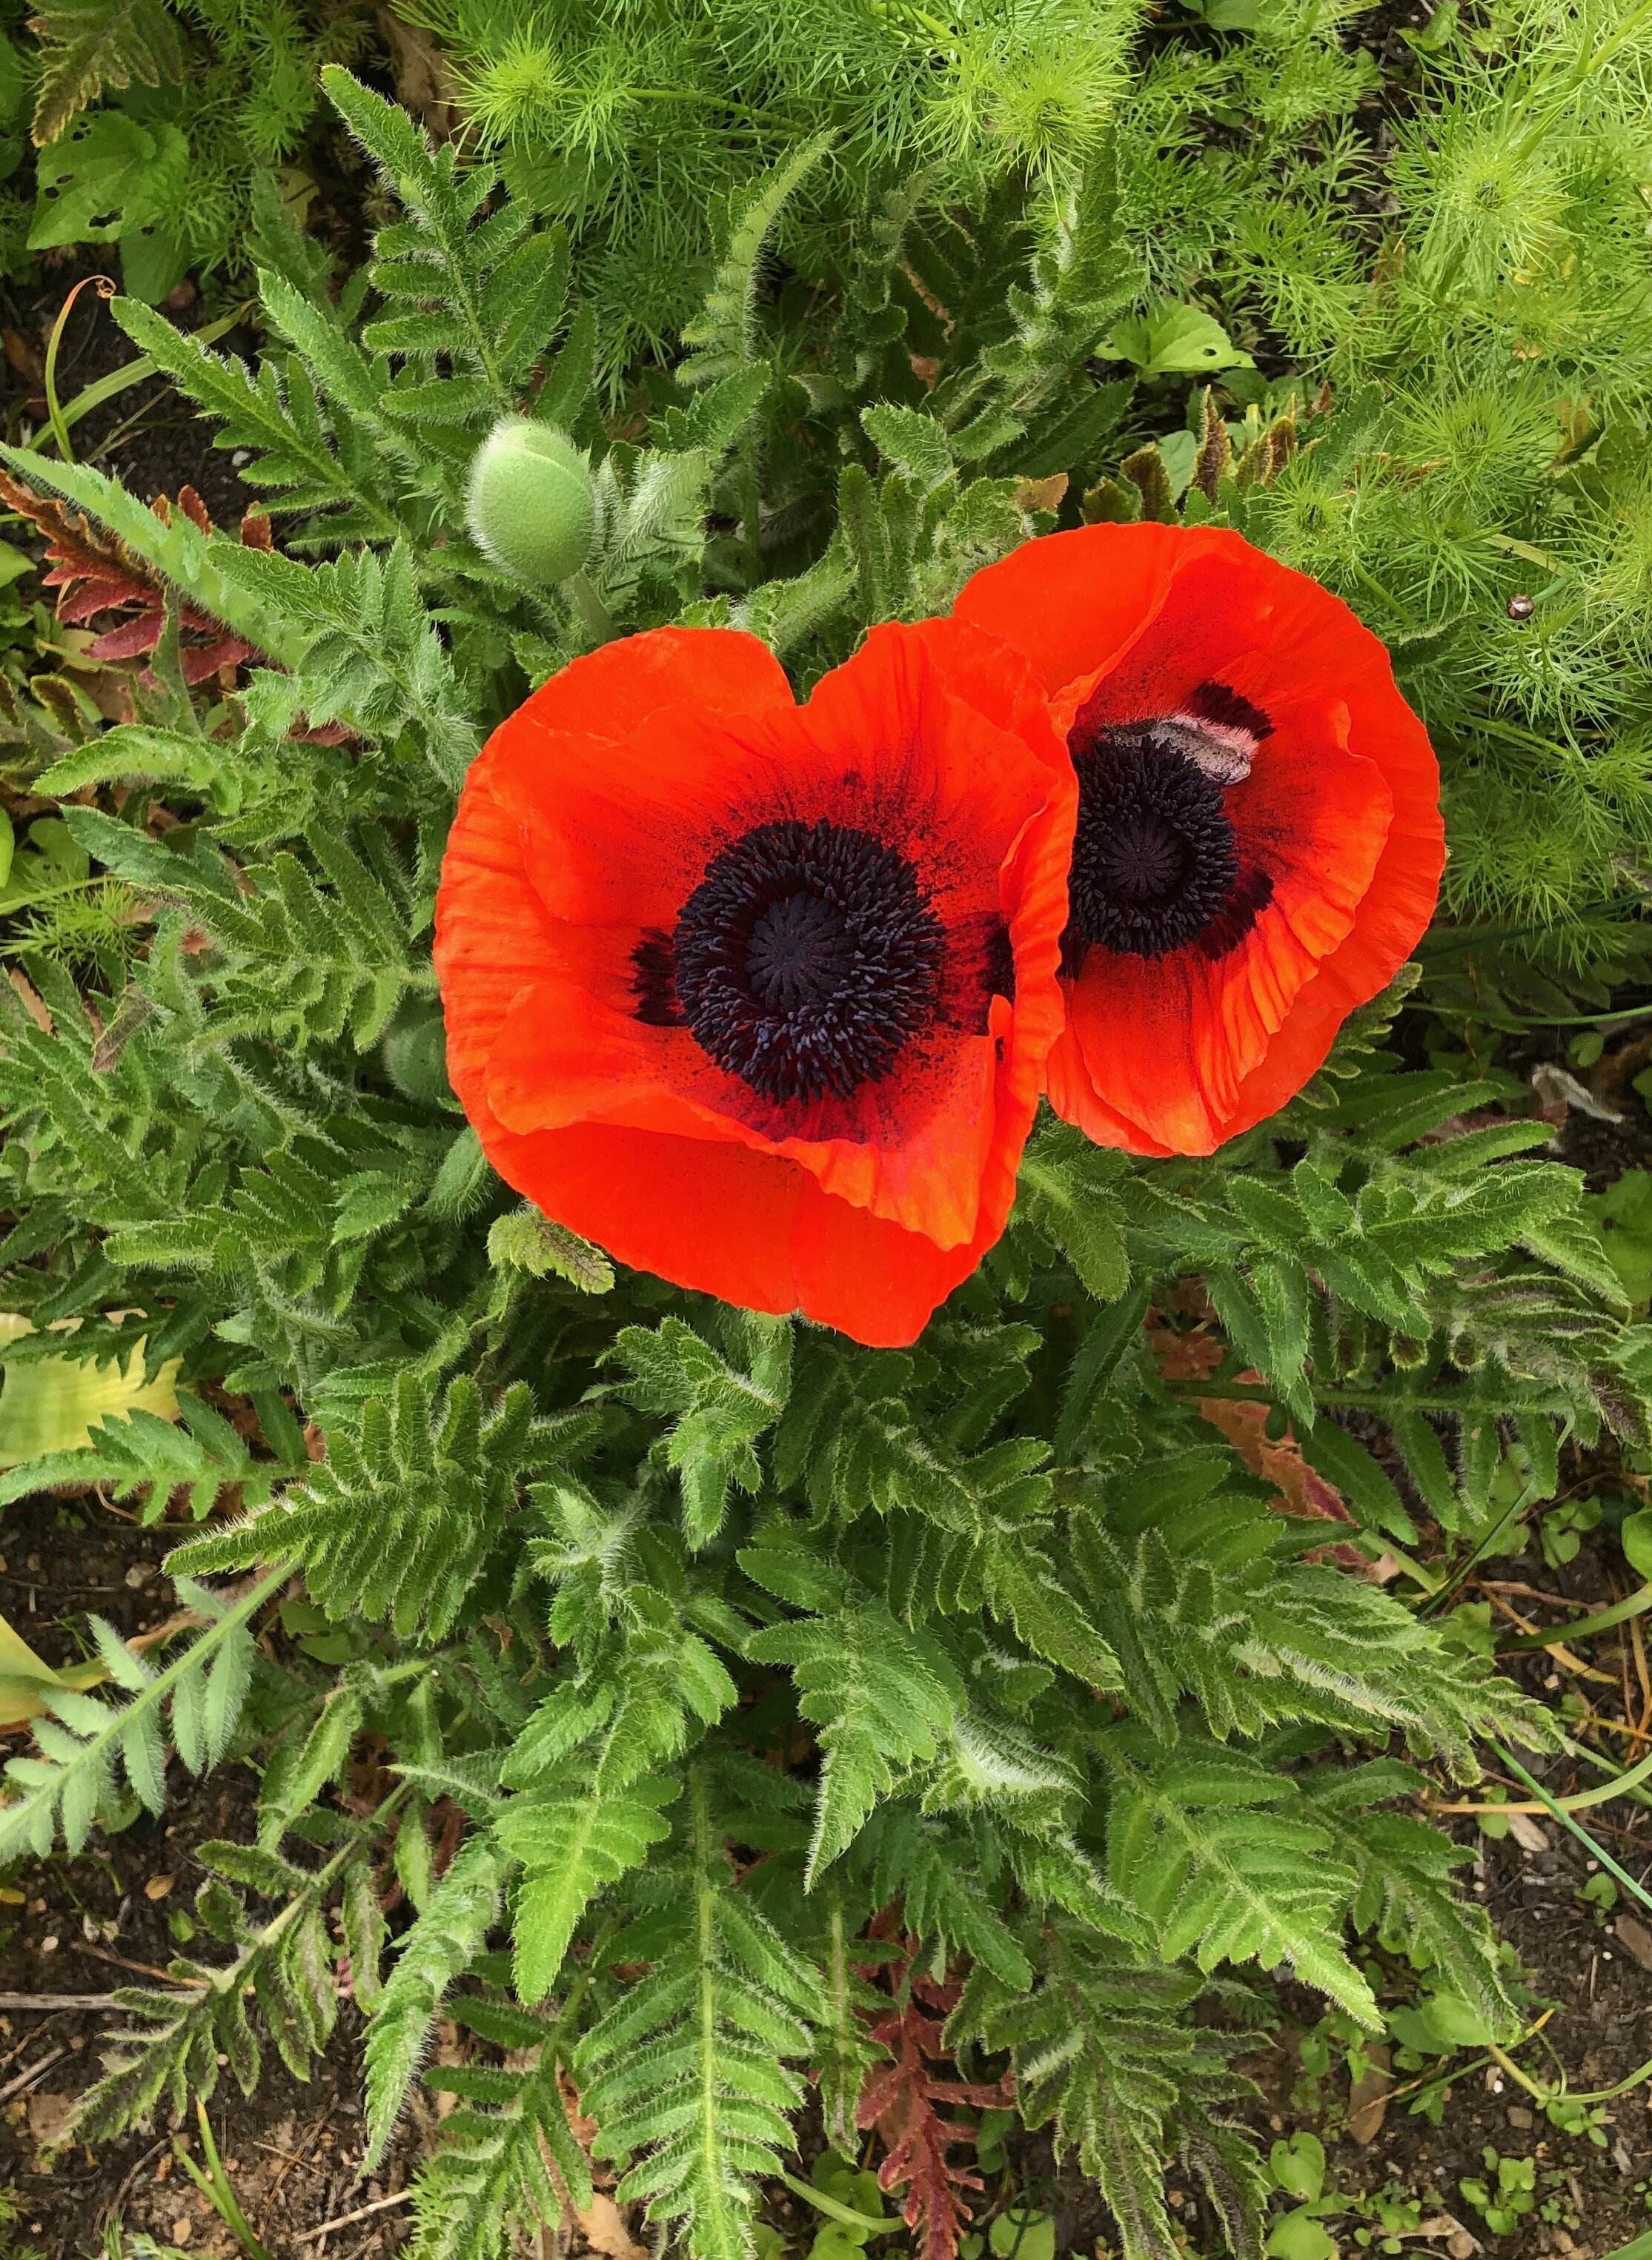  Shimmering, papery petals in a bowl shape are a trademark of Papaver orientalis. The lovely blooms of this perennial poppy in shades of orange, pink, white and red were grown for Mrs. Mellon to use in arrangements. Annual poppies such as California,